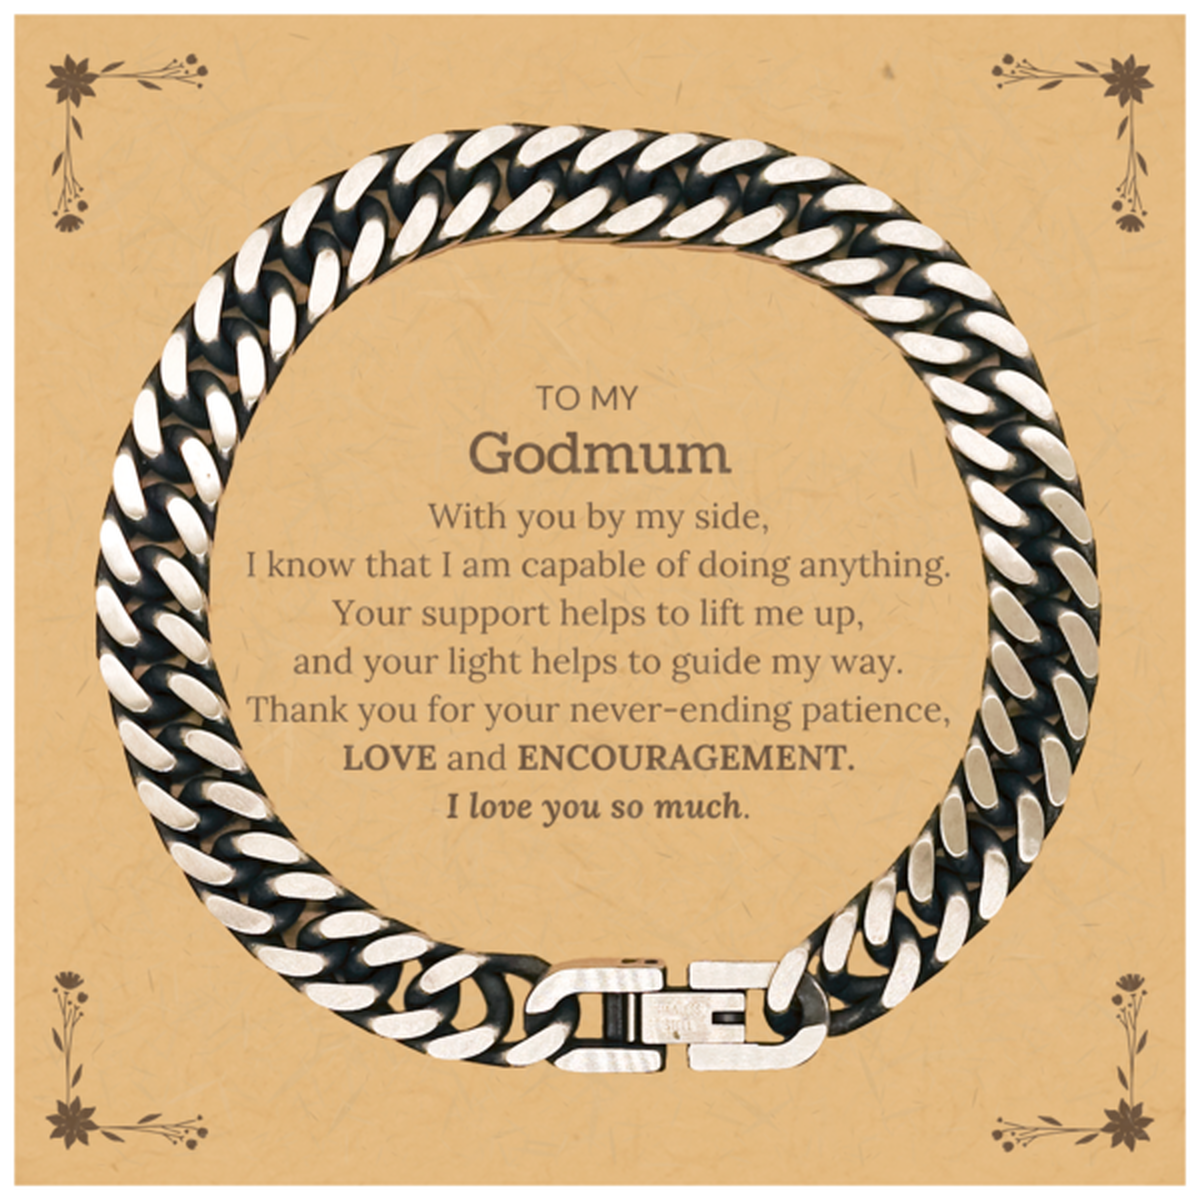 Appreciation Godmum Cuban Link Chain Bracelet Gifts, To My Godmum Birthday Christmas Wedding Keepsake Gifts for Godmum With you by my side, I know that I am capable of doing anything. I love you so much